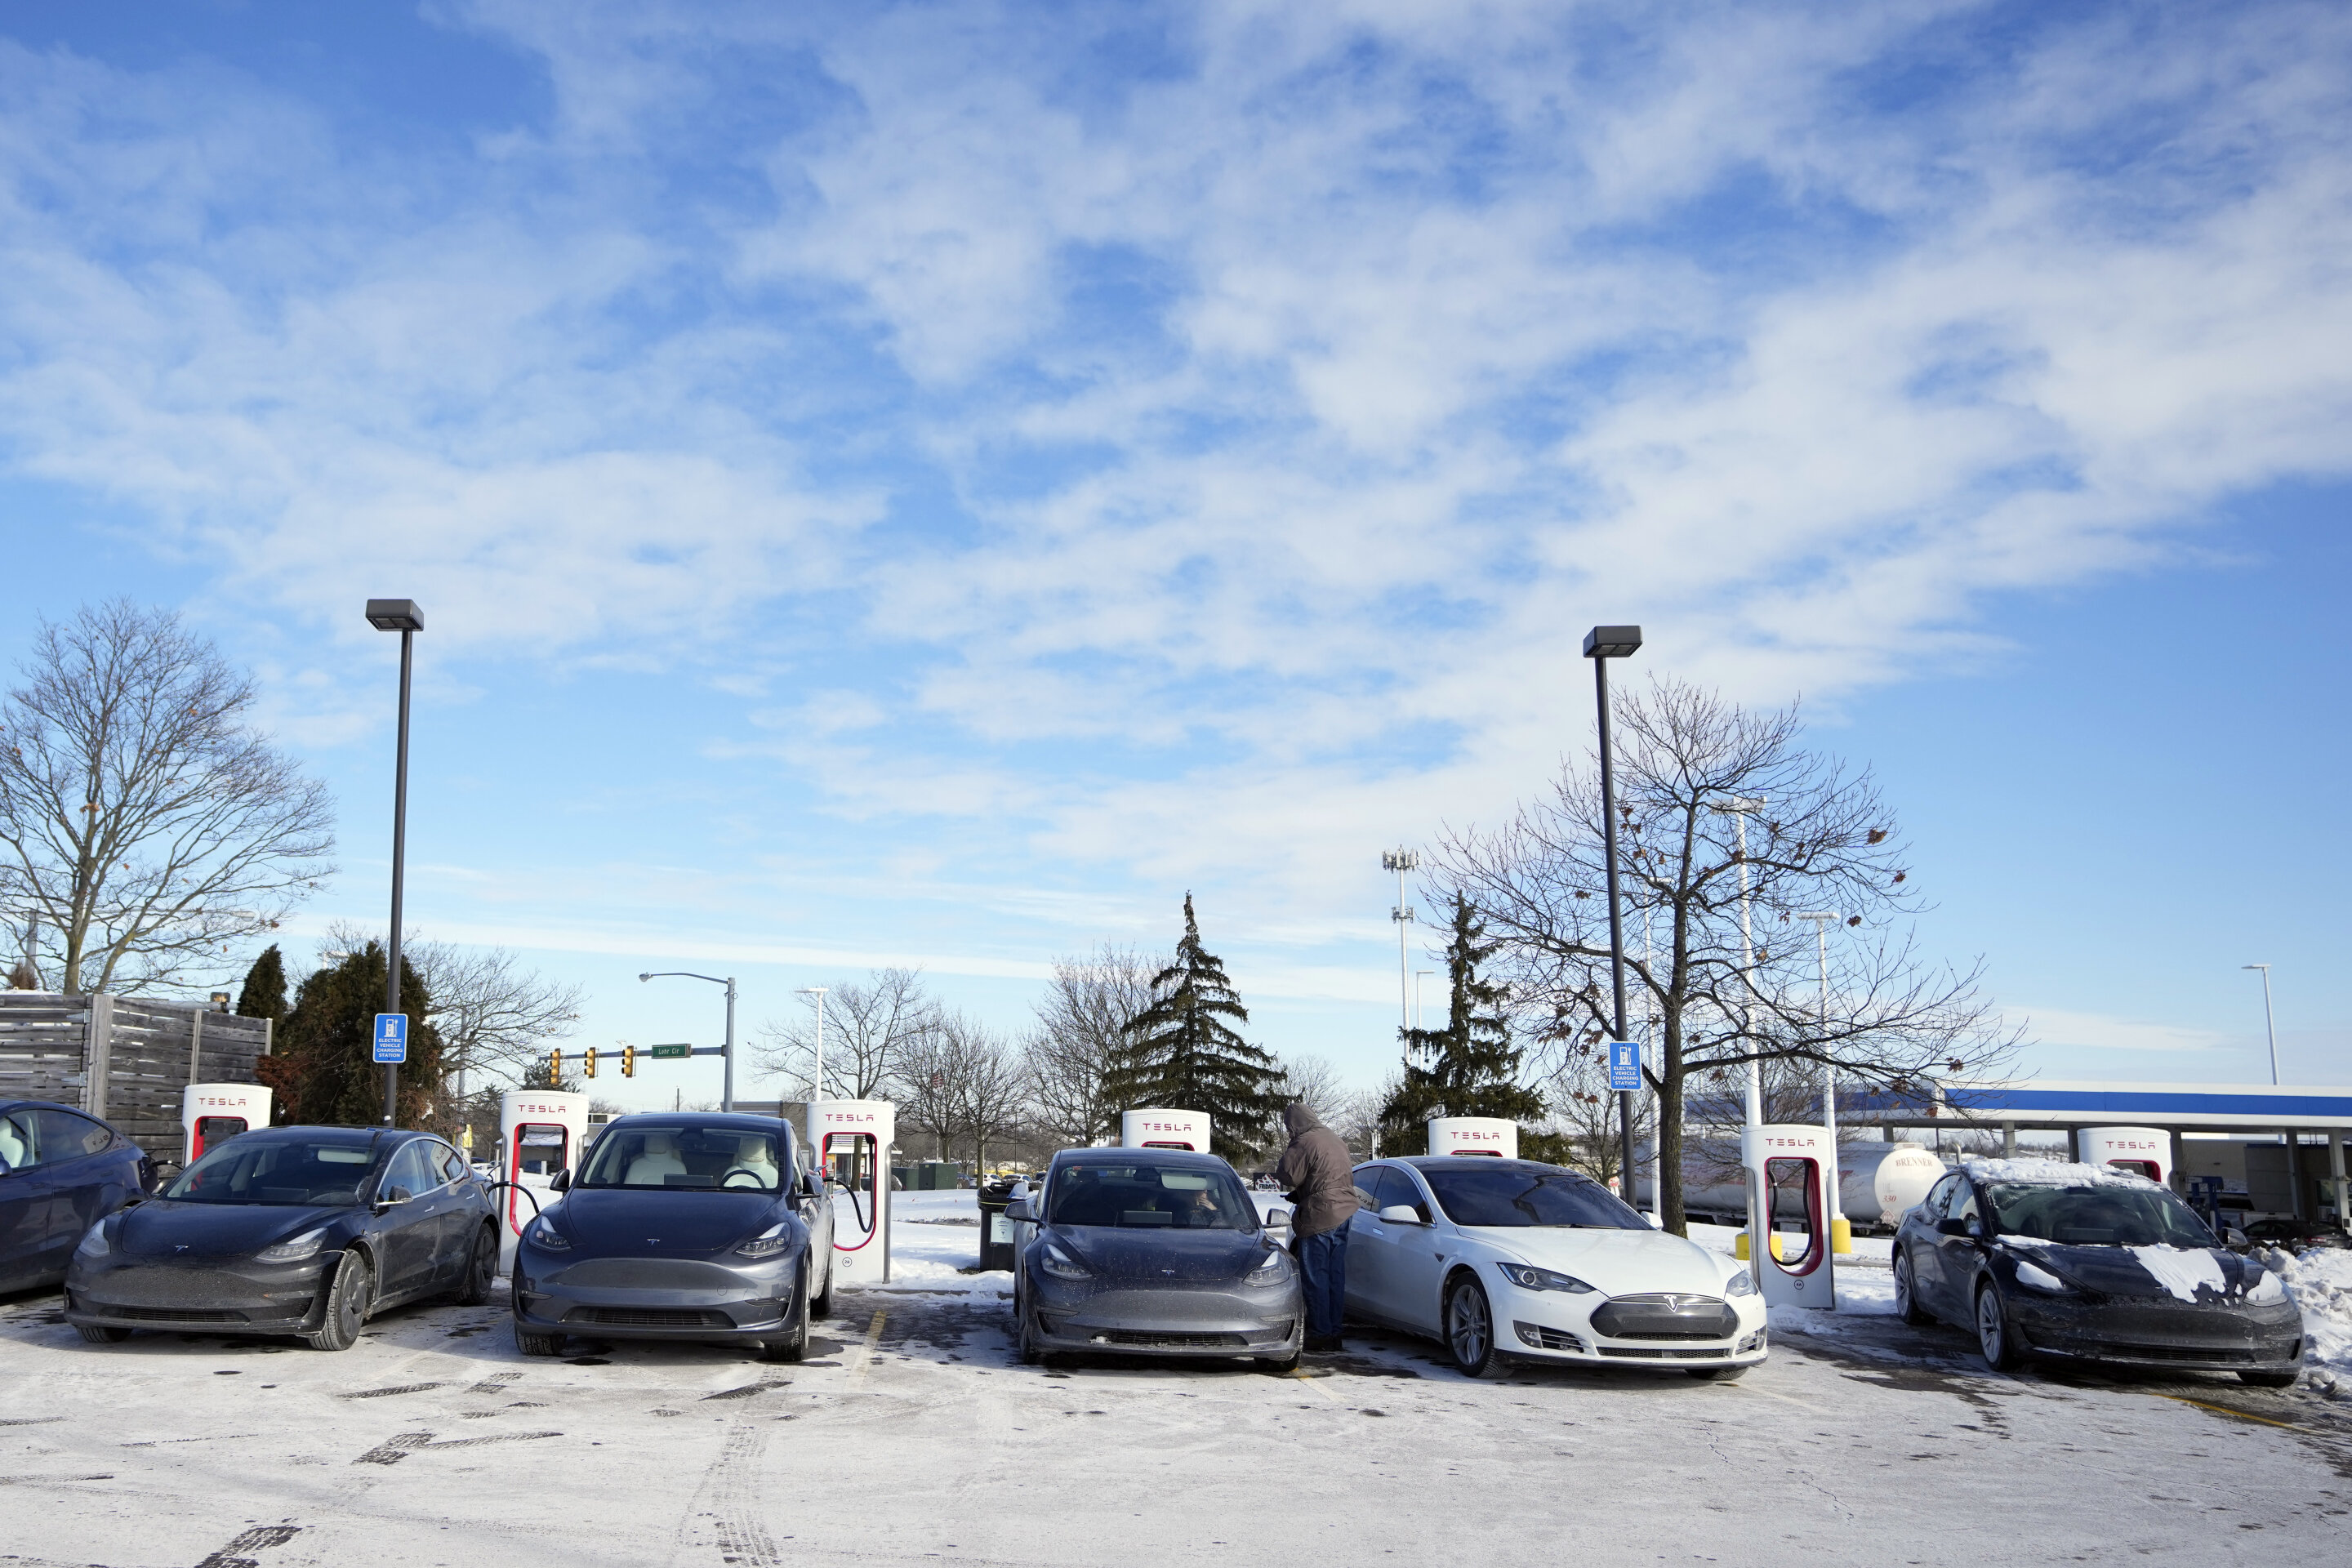 #Frigid weather can cut electric vehicle range and make charging tough. Here’s what you need to know